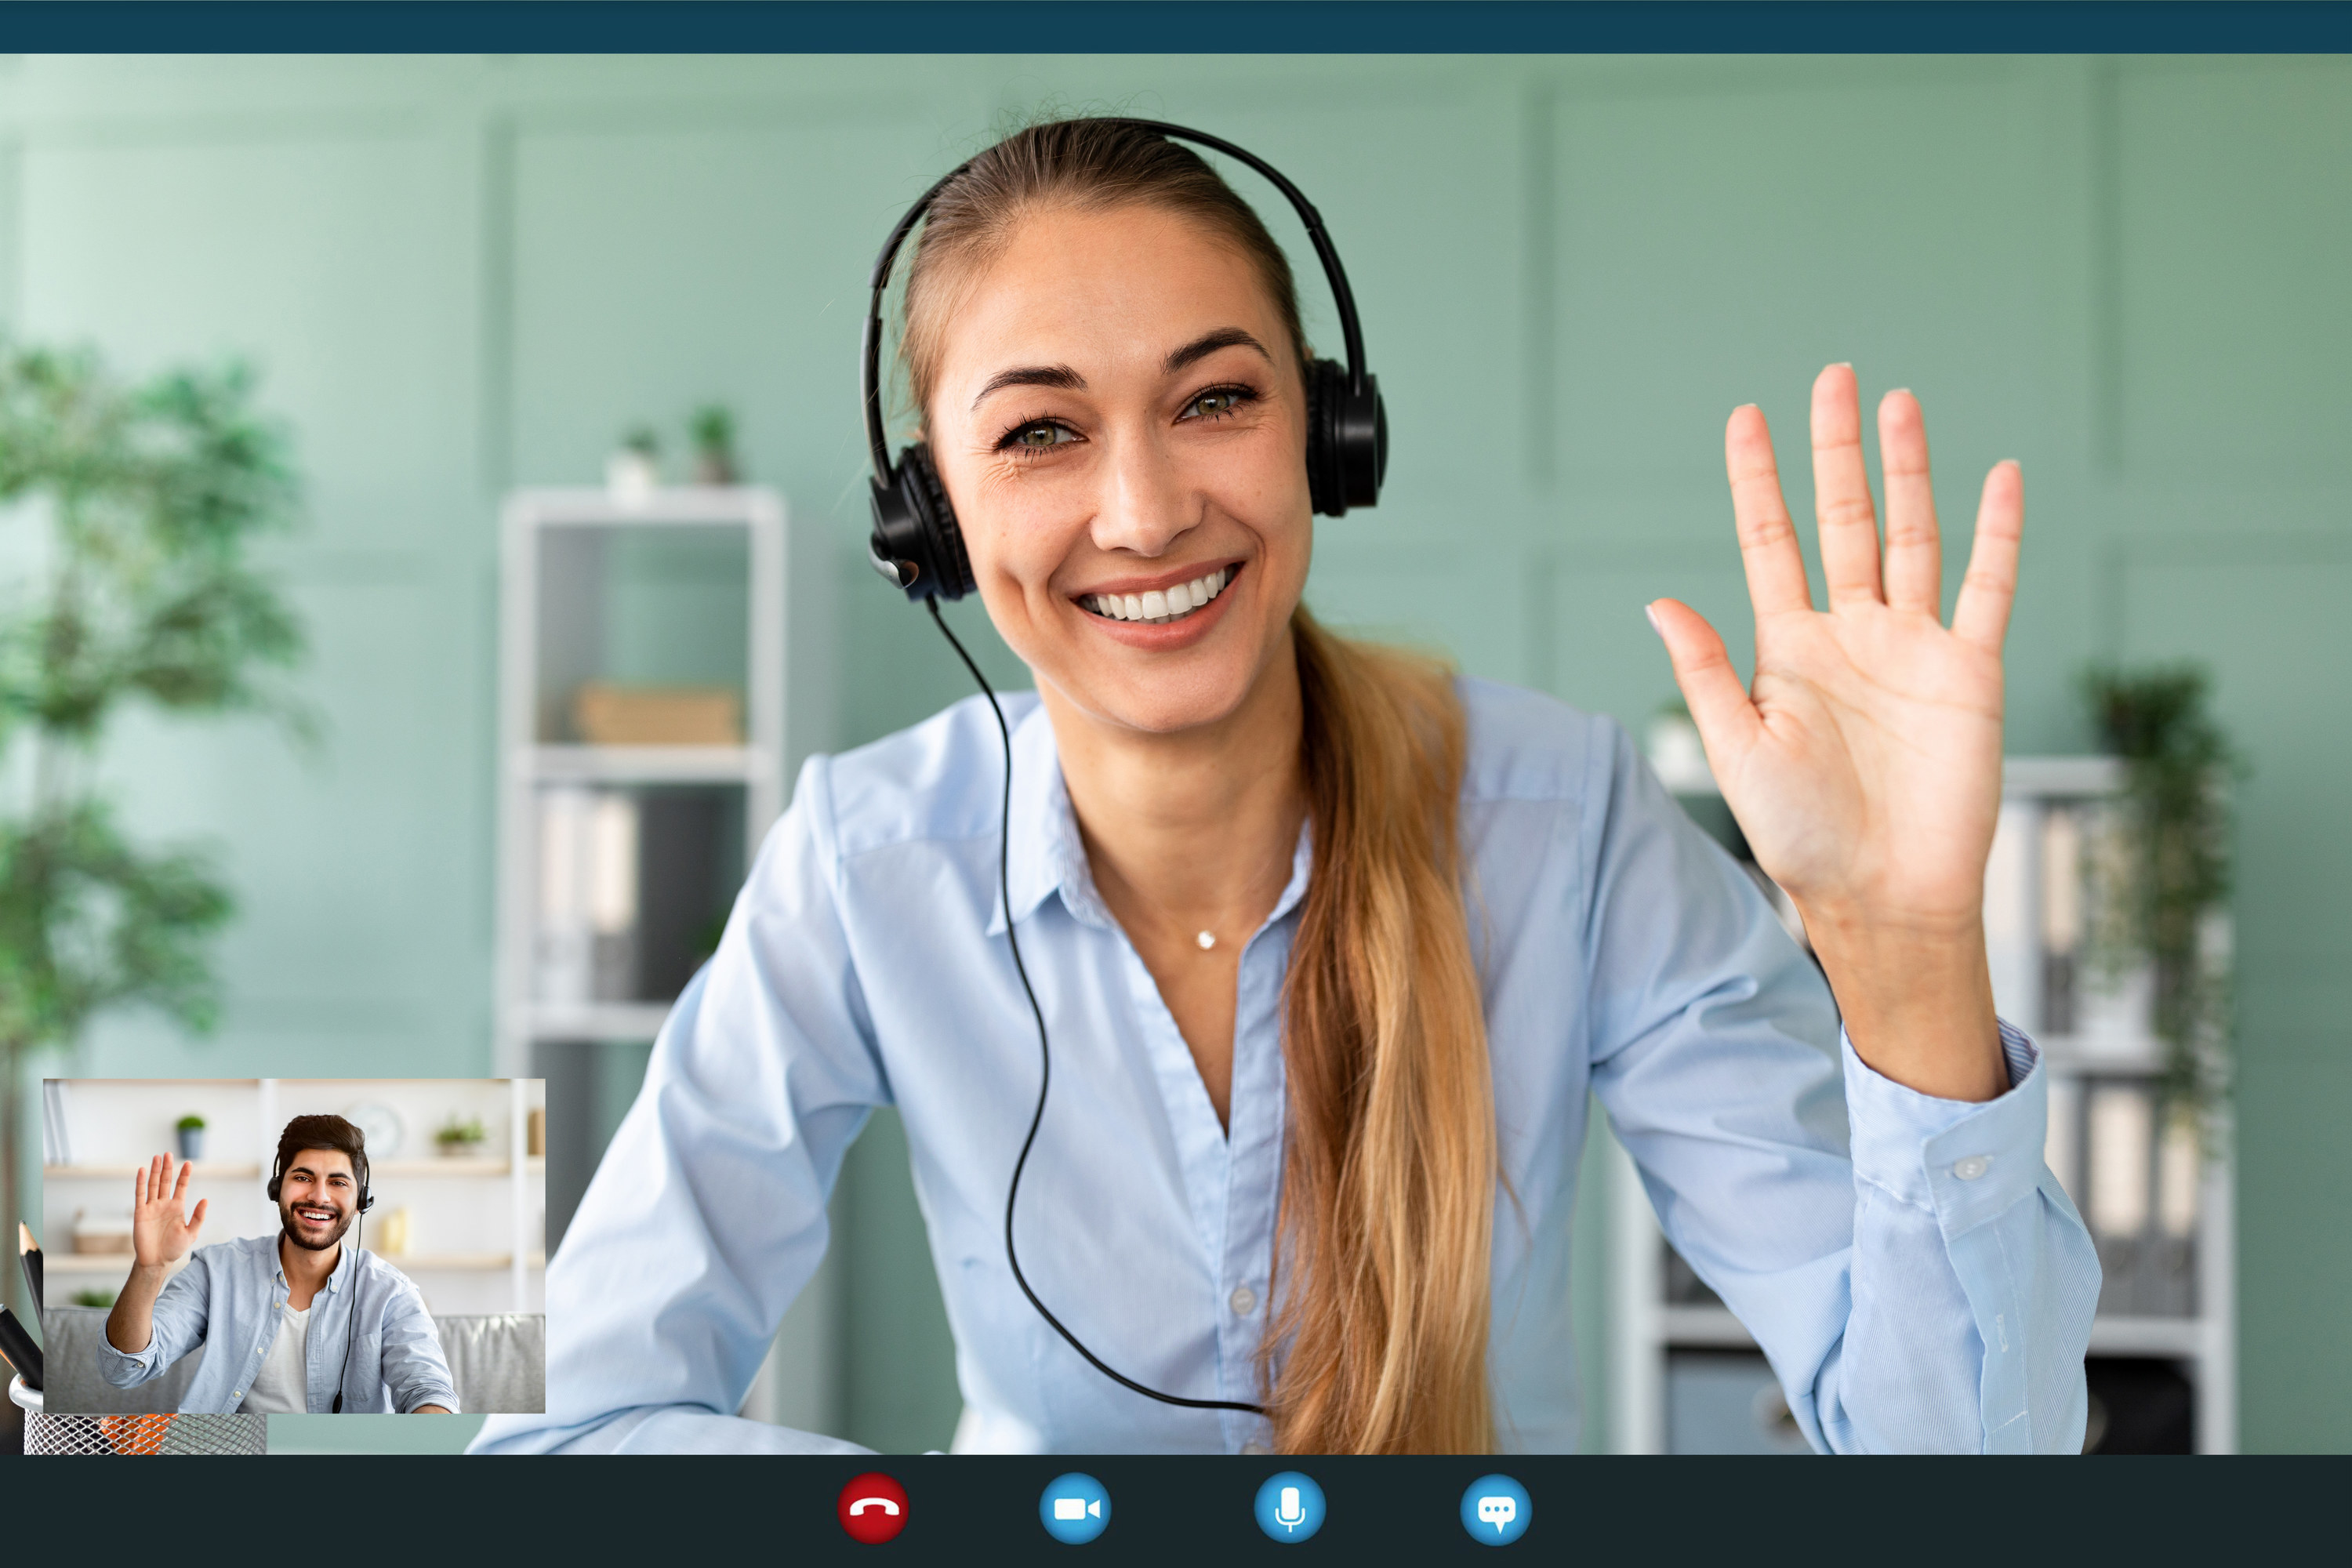 Woman waving hello in a virtual interview